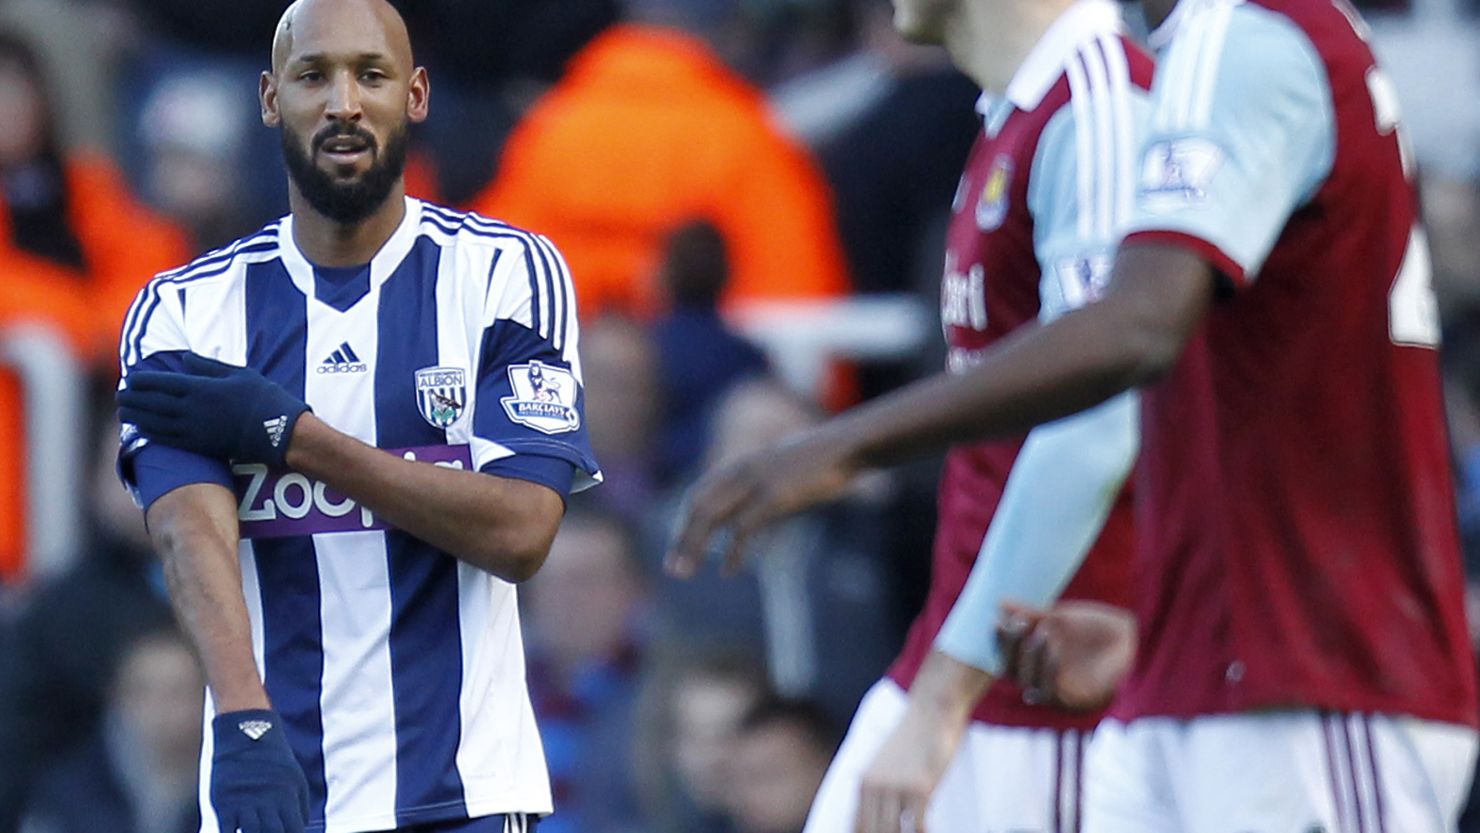 Nicolas Anelka denied making an anti-Semitic gesture on Saturday but the French government criticized the striker. 